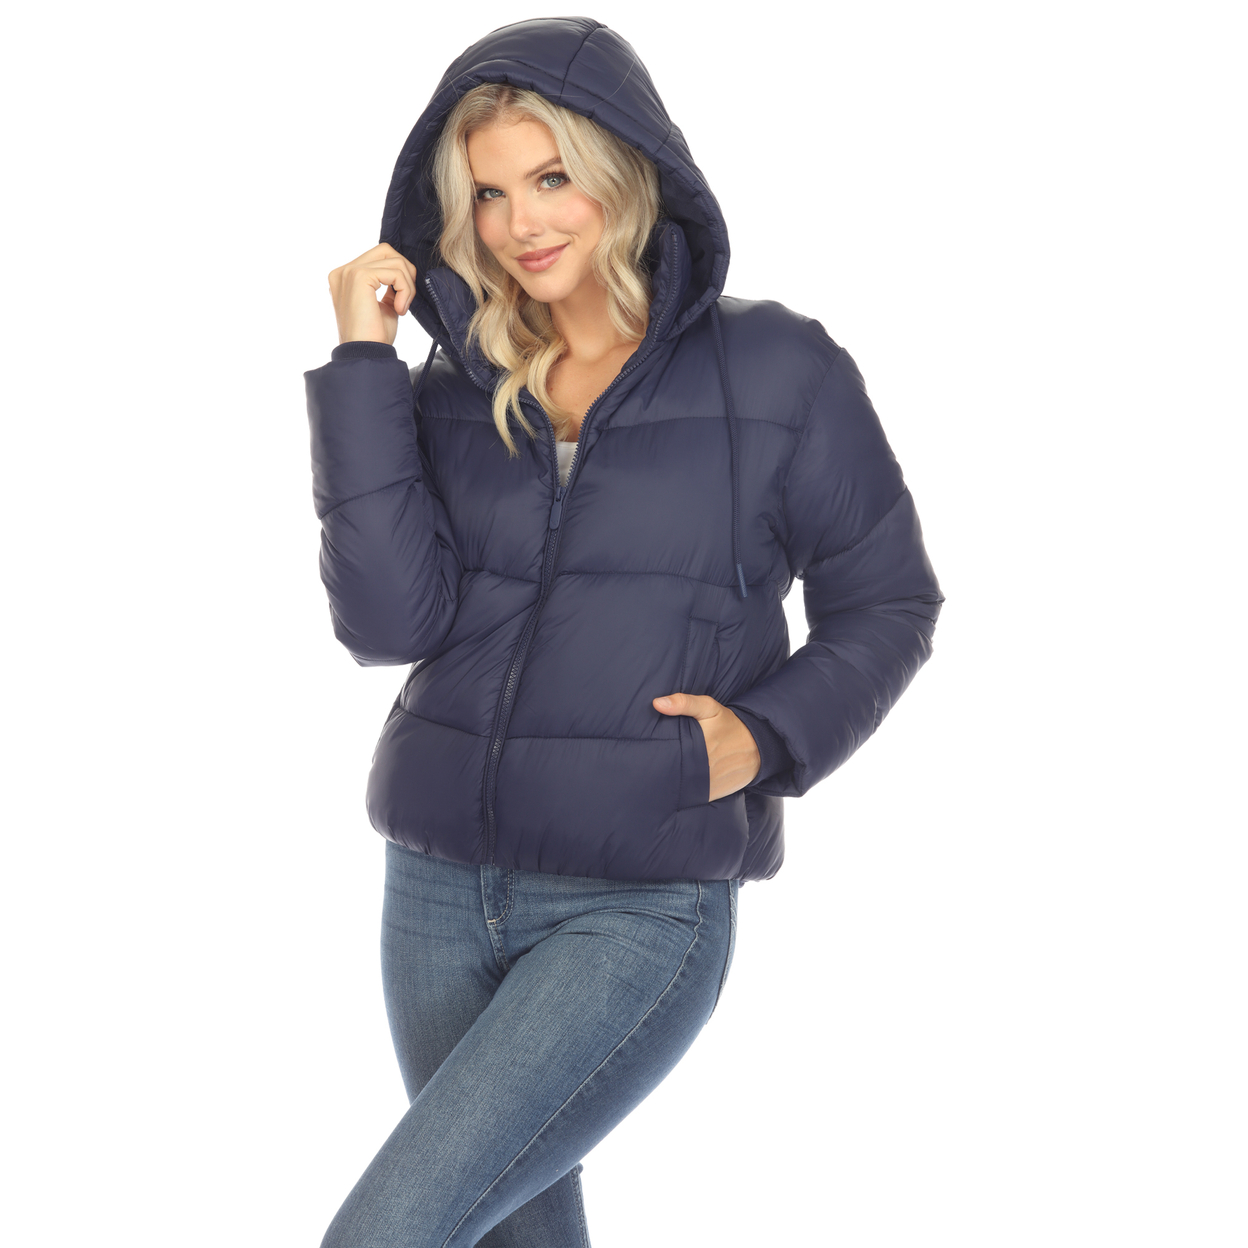 White Mark Women's Zip Hooded Puffer Jacket With Pockets - Gray, 1x